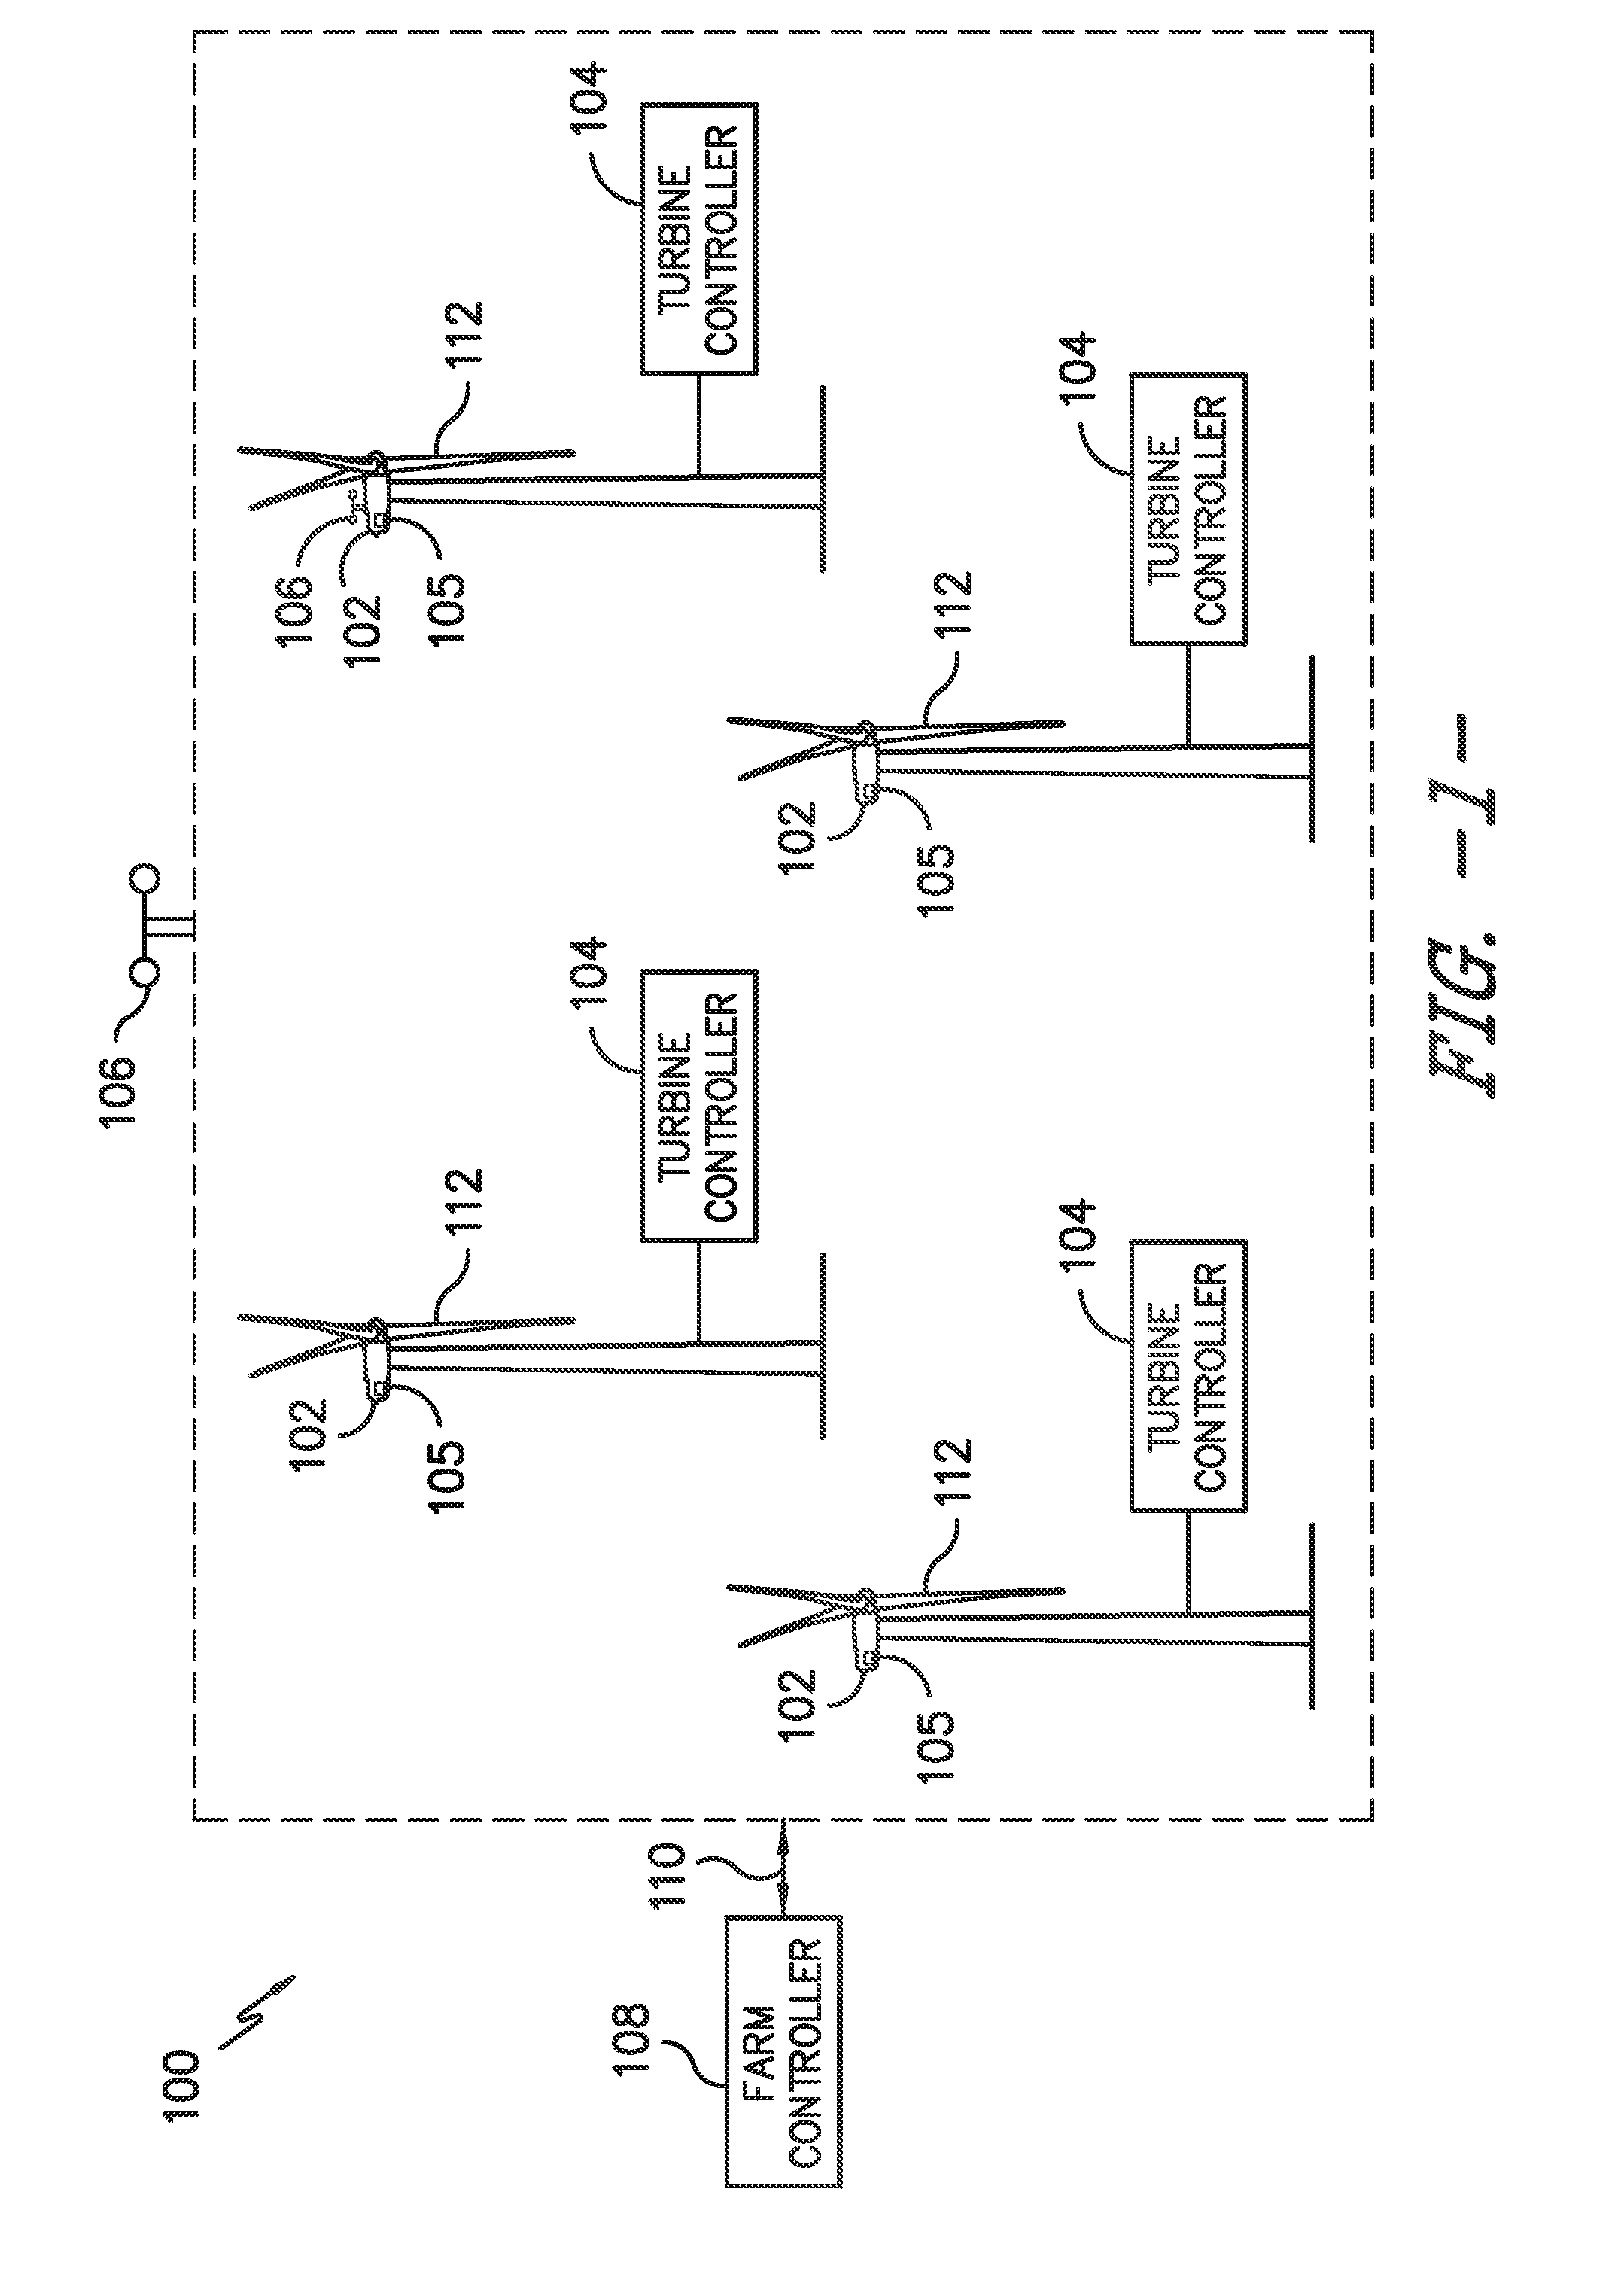 Systems and methods for validating wind farm performance measurements